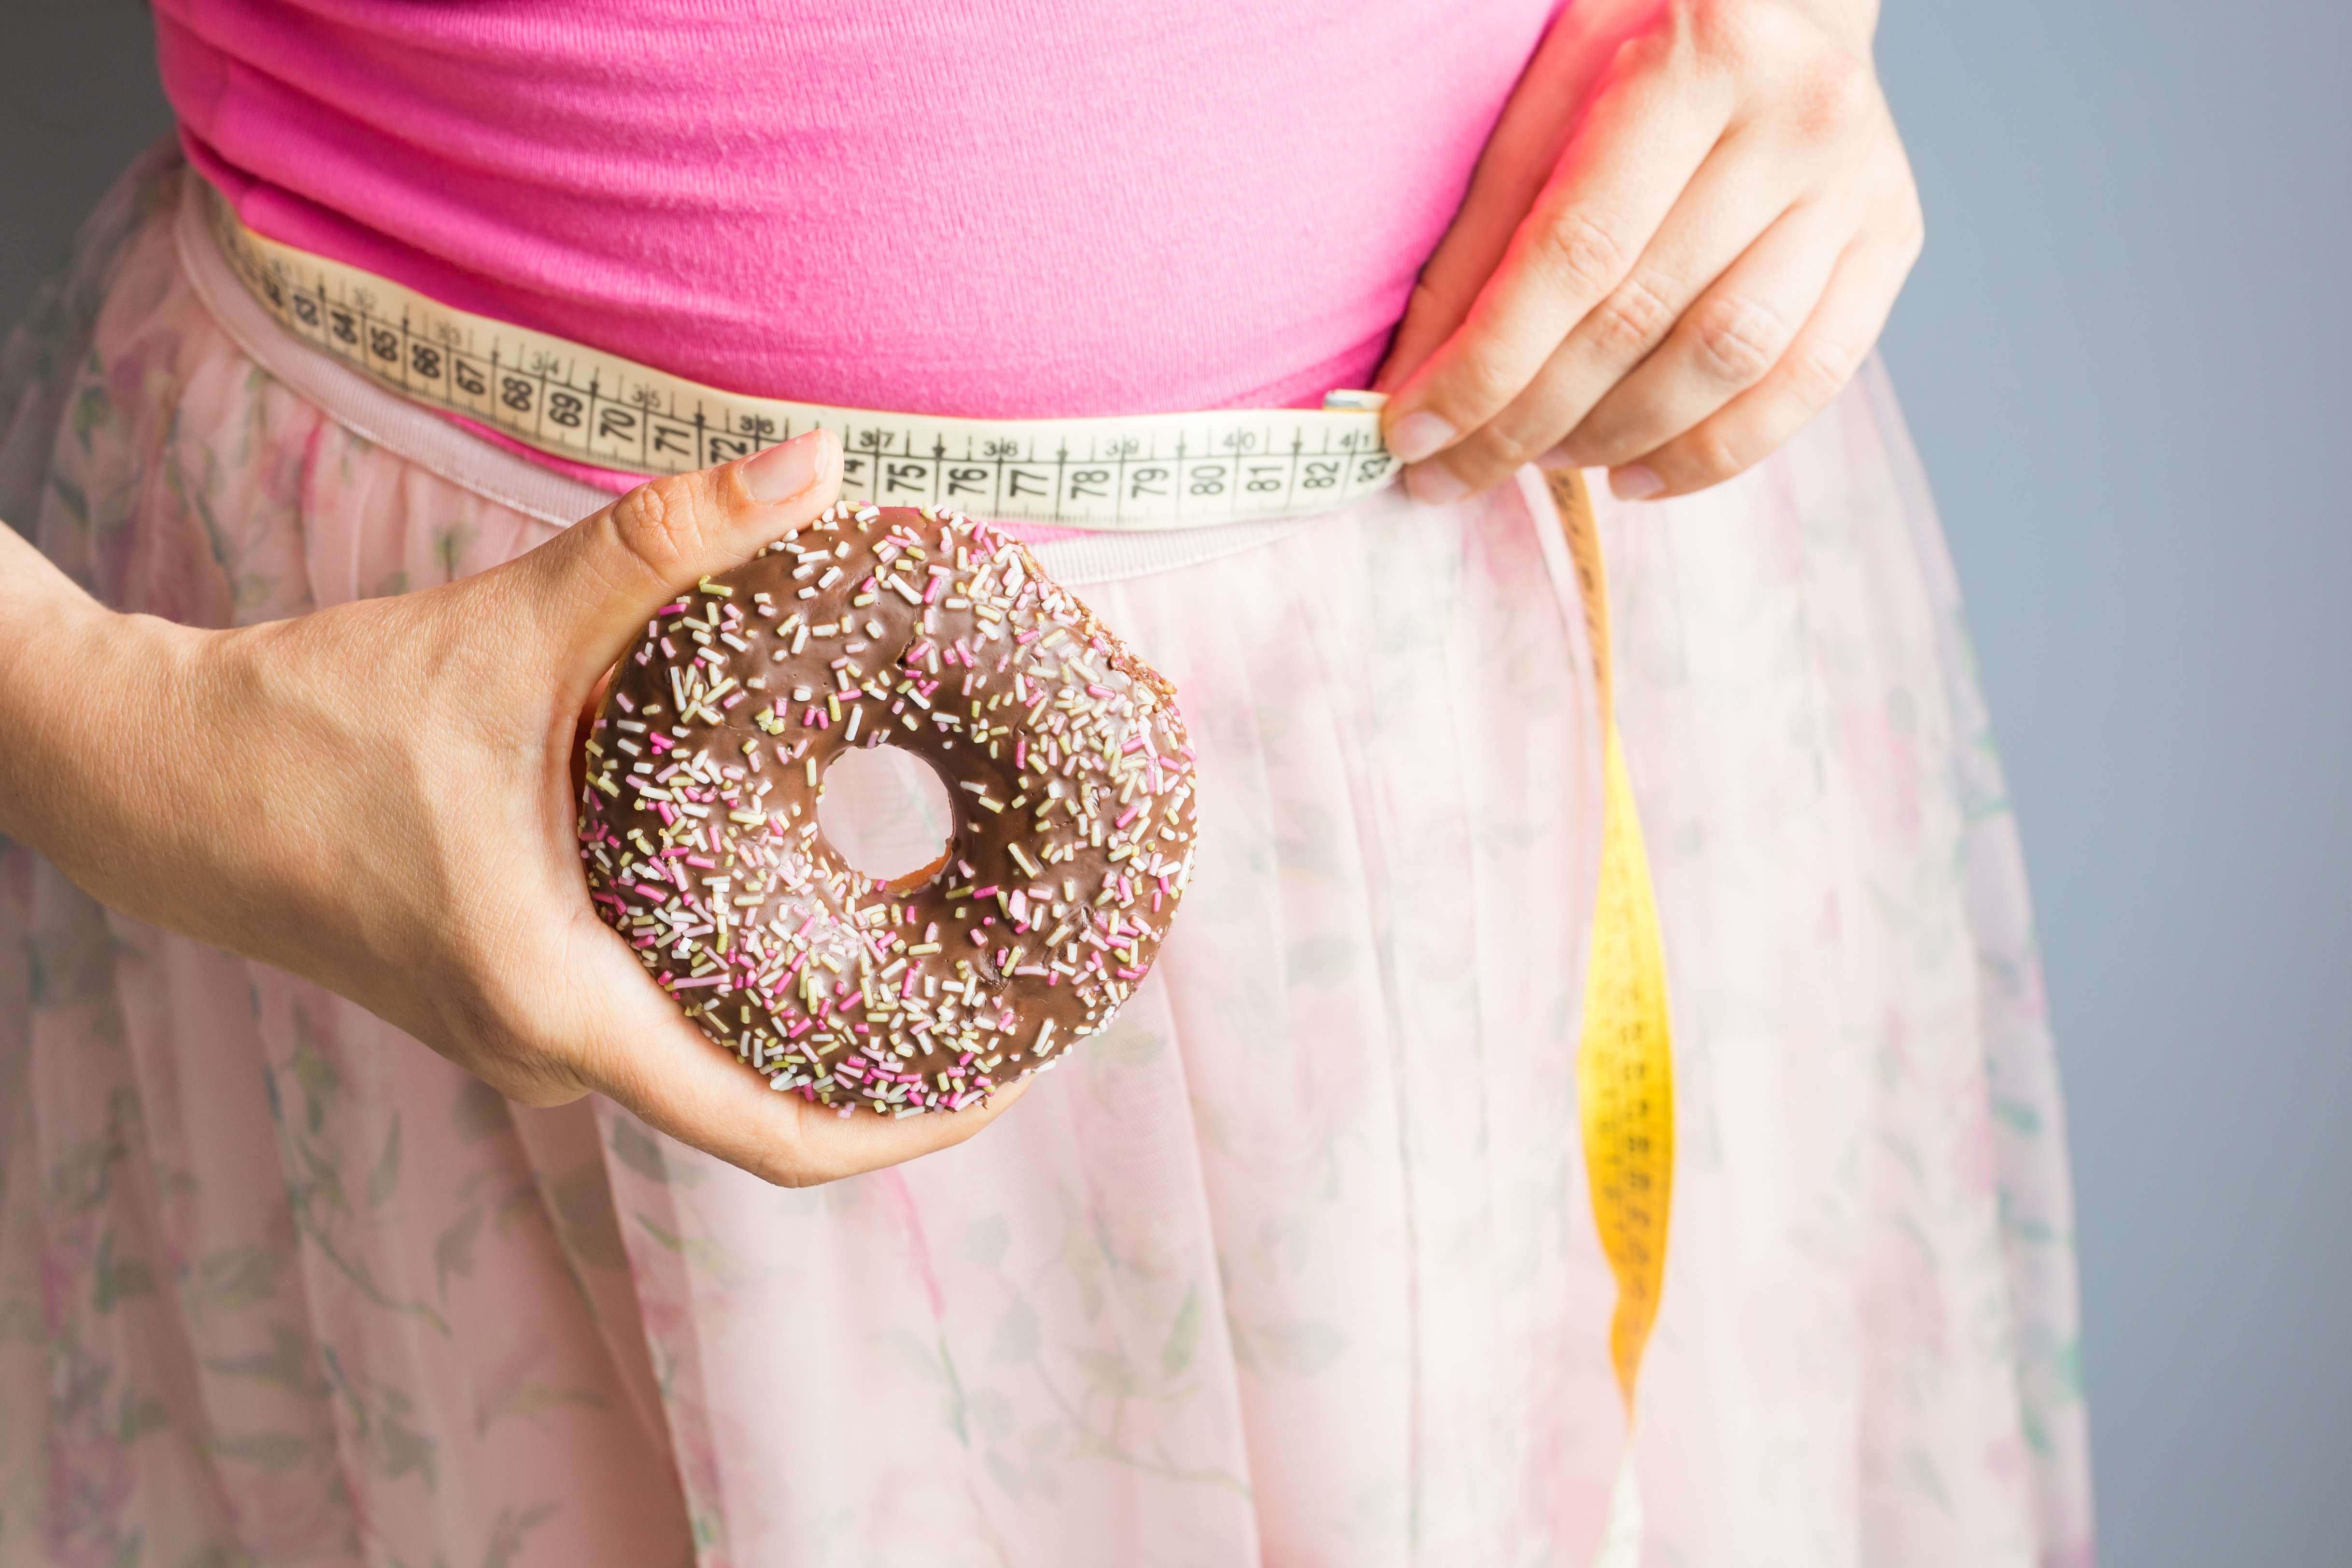 image for Today’s Obesity Epidemic May Have Been Caused by Childhood Sugar Intake Decades Ago